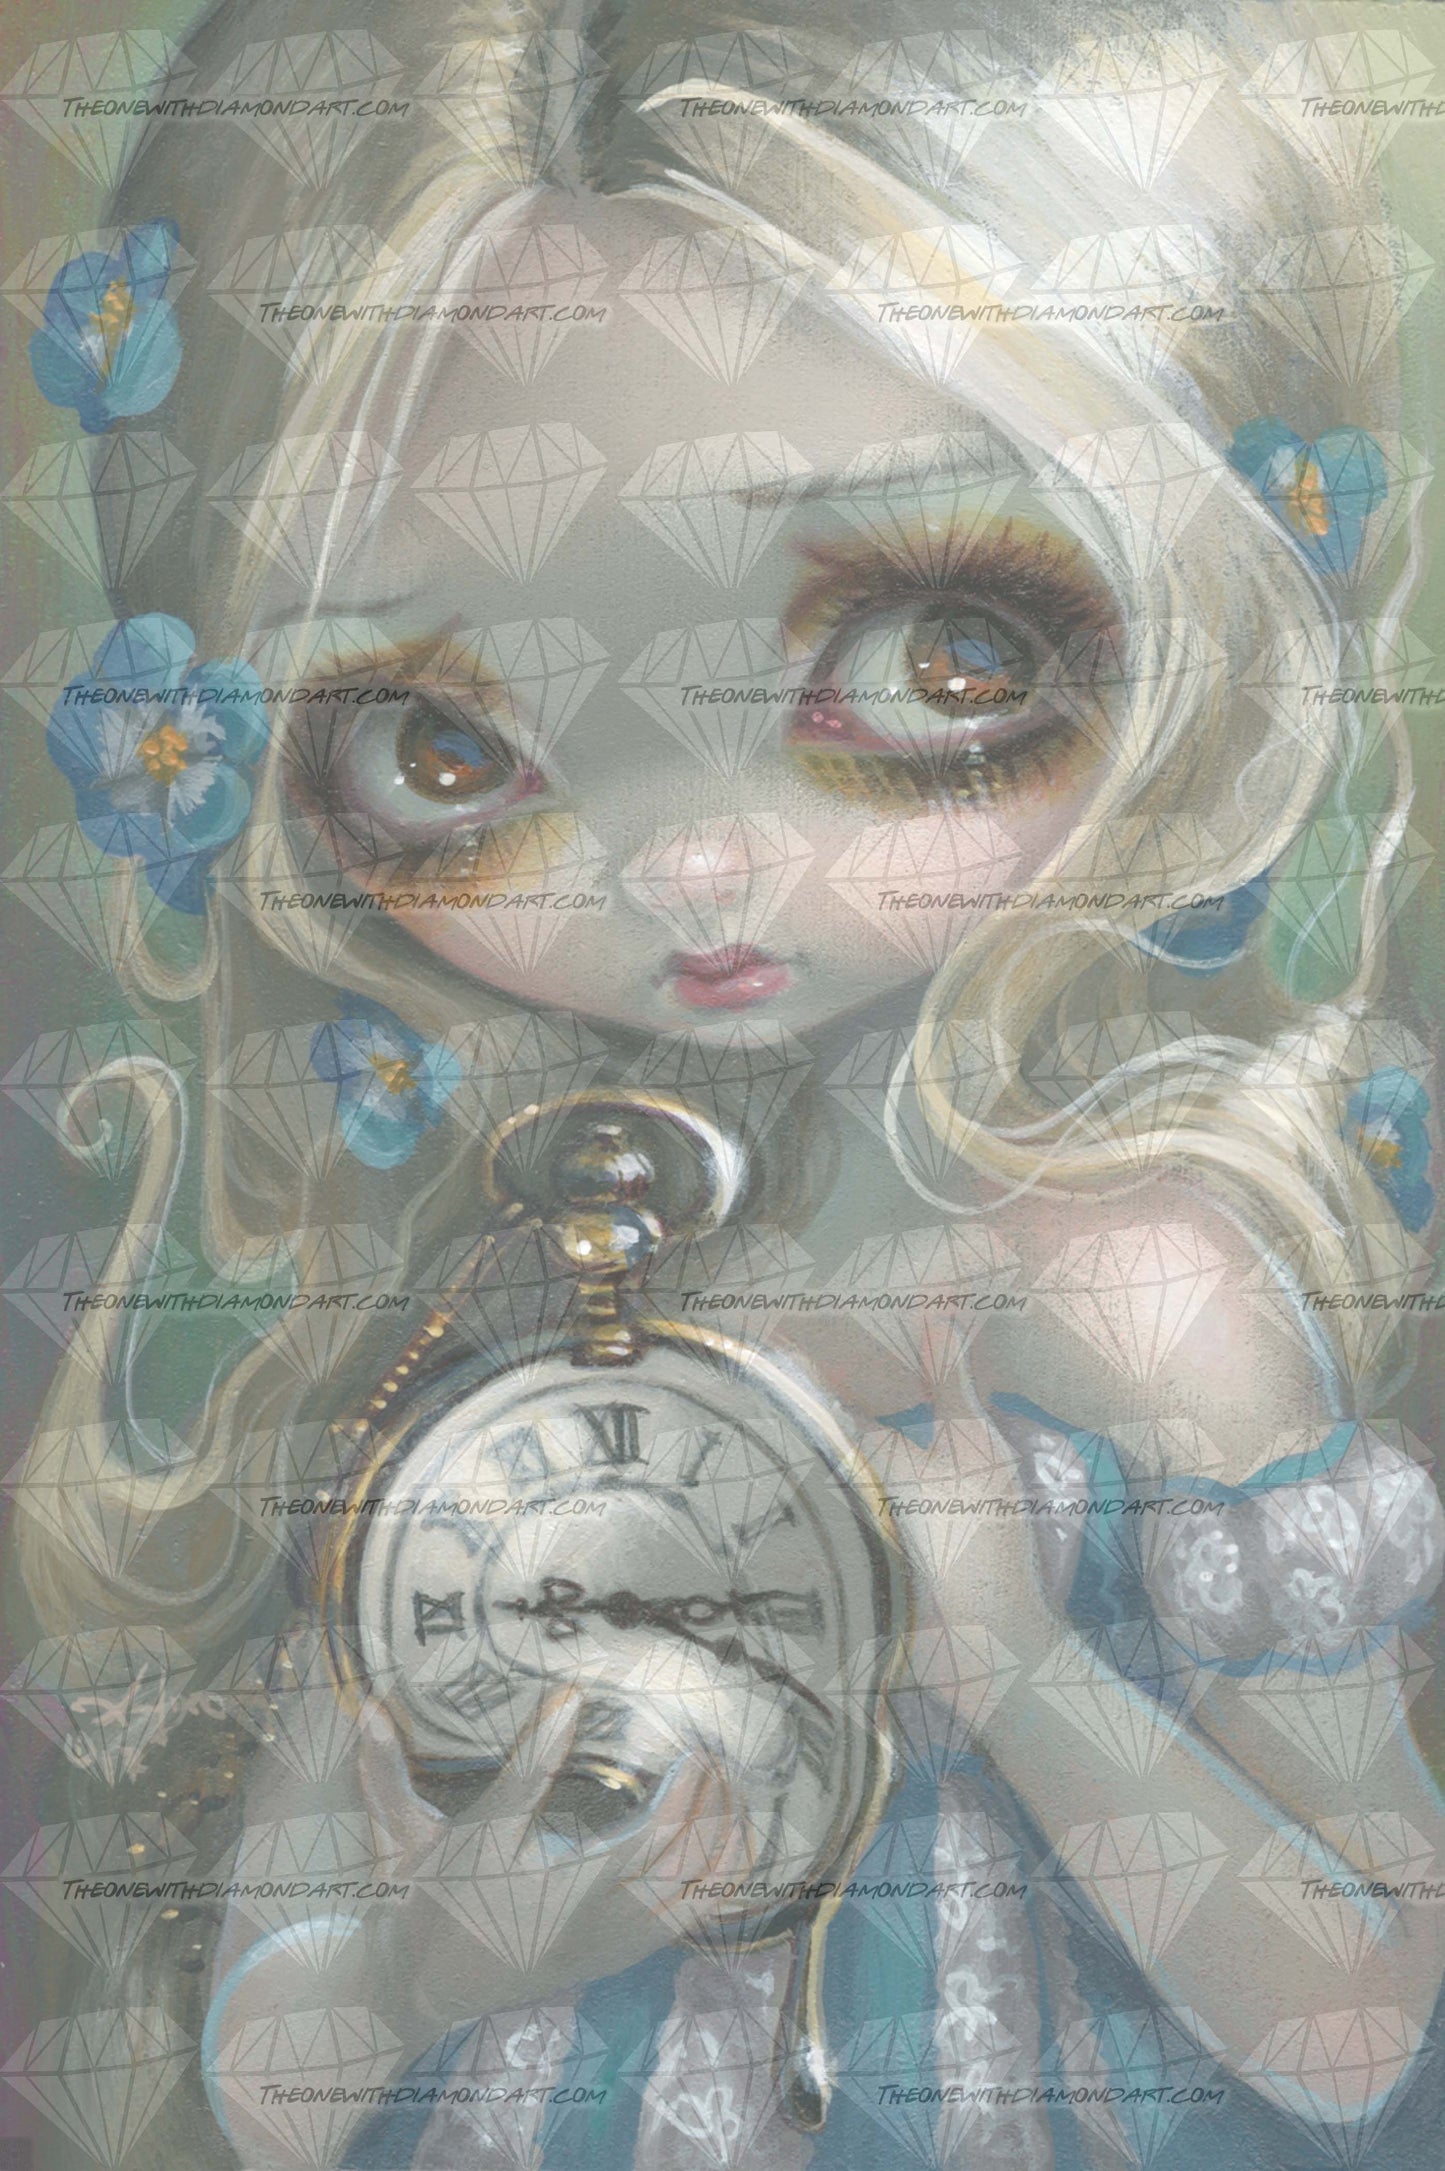 Keeping Up ©Jasmine Becket-Griffith